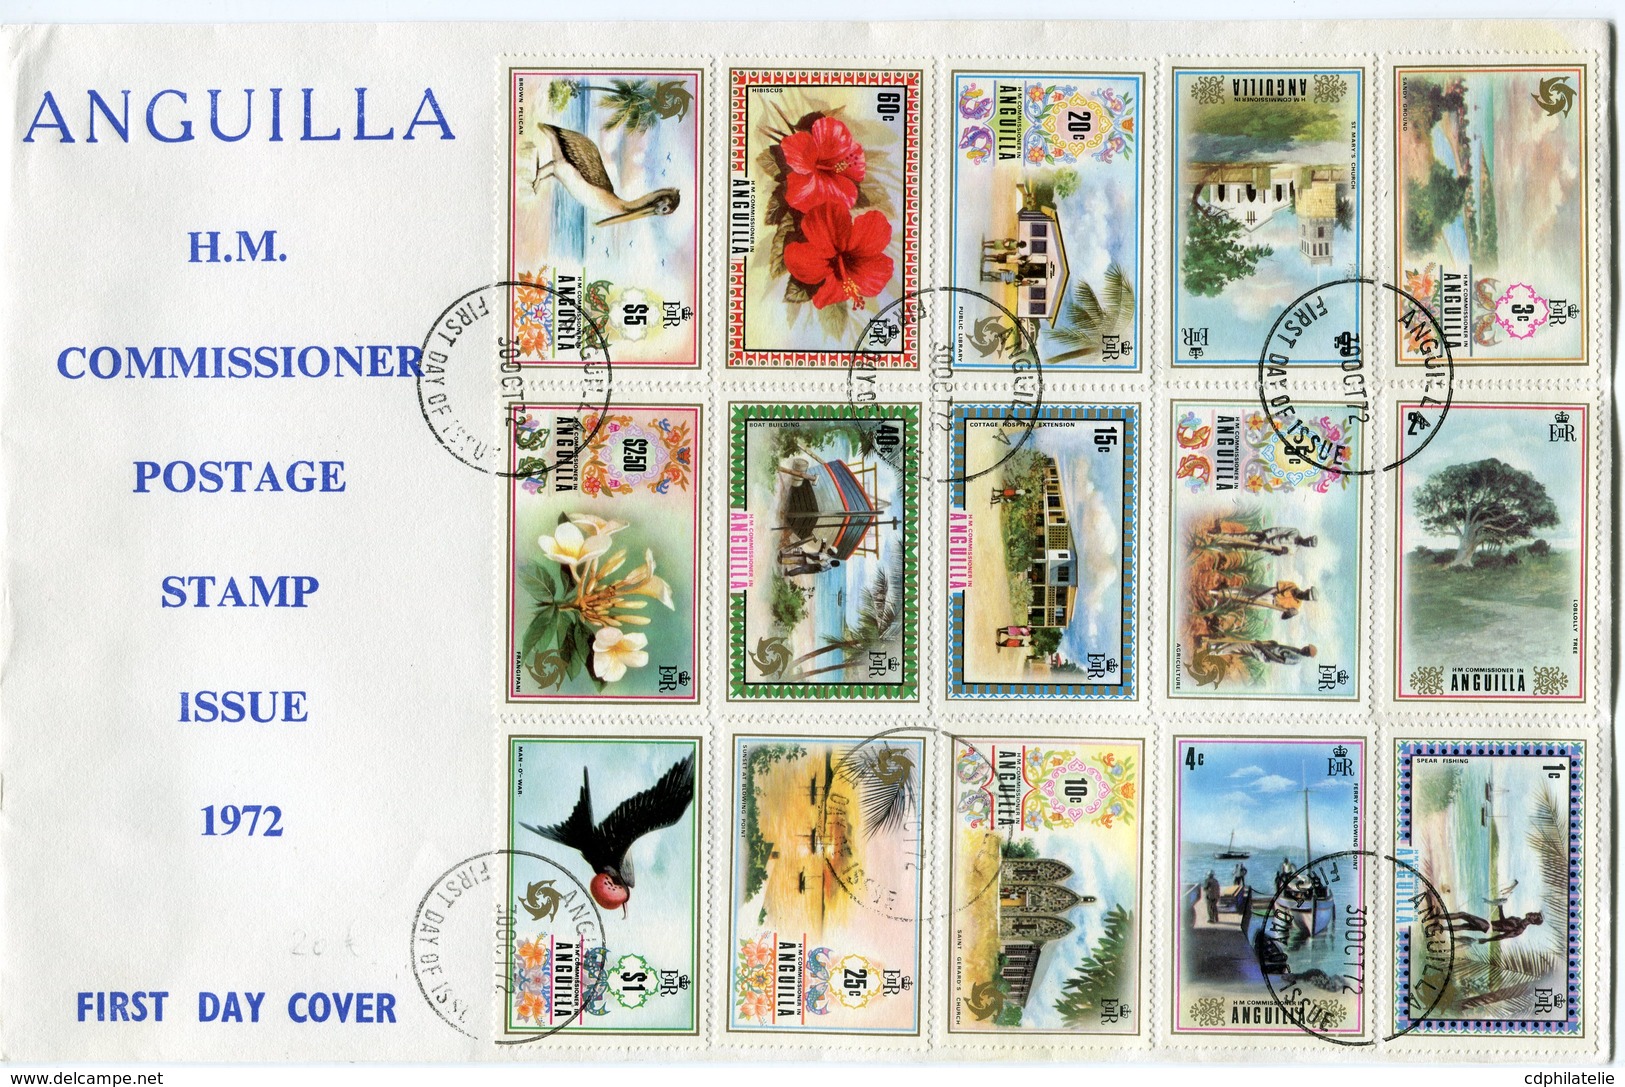 ANGUILLA ENVELOPPE 1er JOUR DES N°114 / 128 SERIE COURANTE OBLITERATION ANGUILLA 30 OCT 72 FIRST DAY OF ISSUE - Anguilla (1968-...)